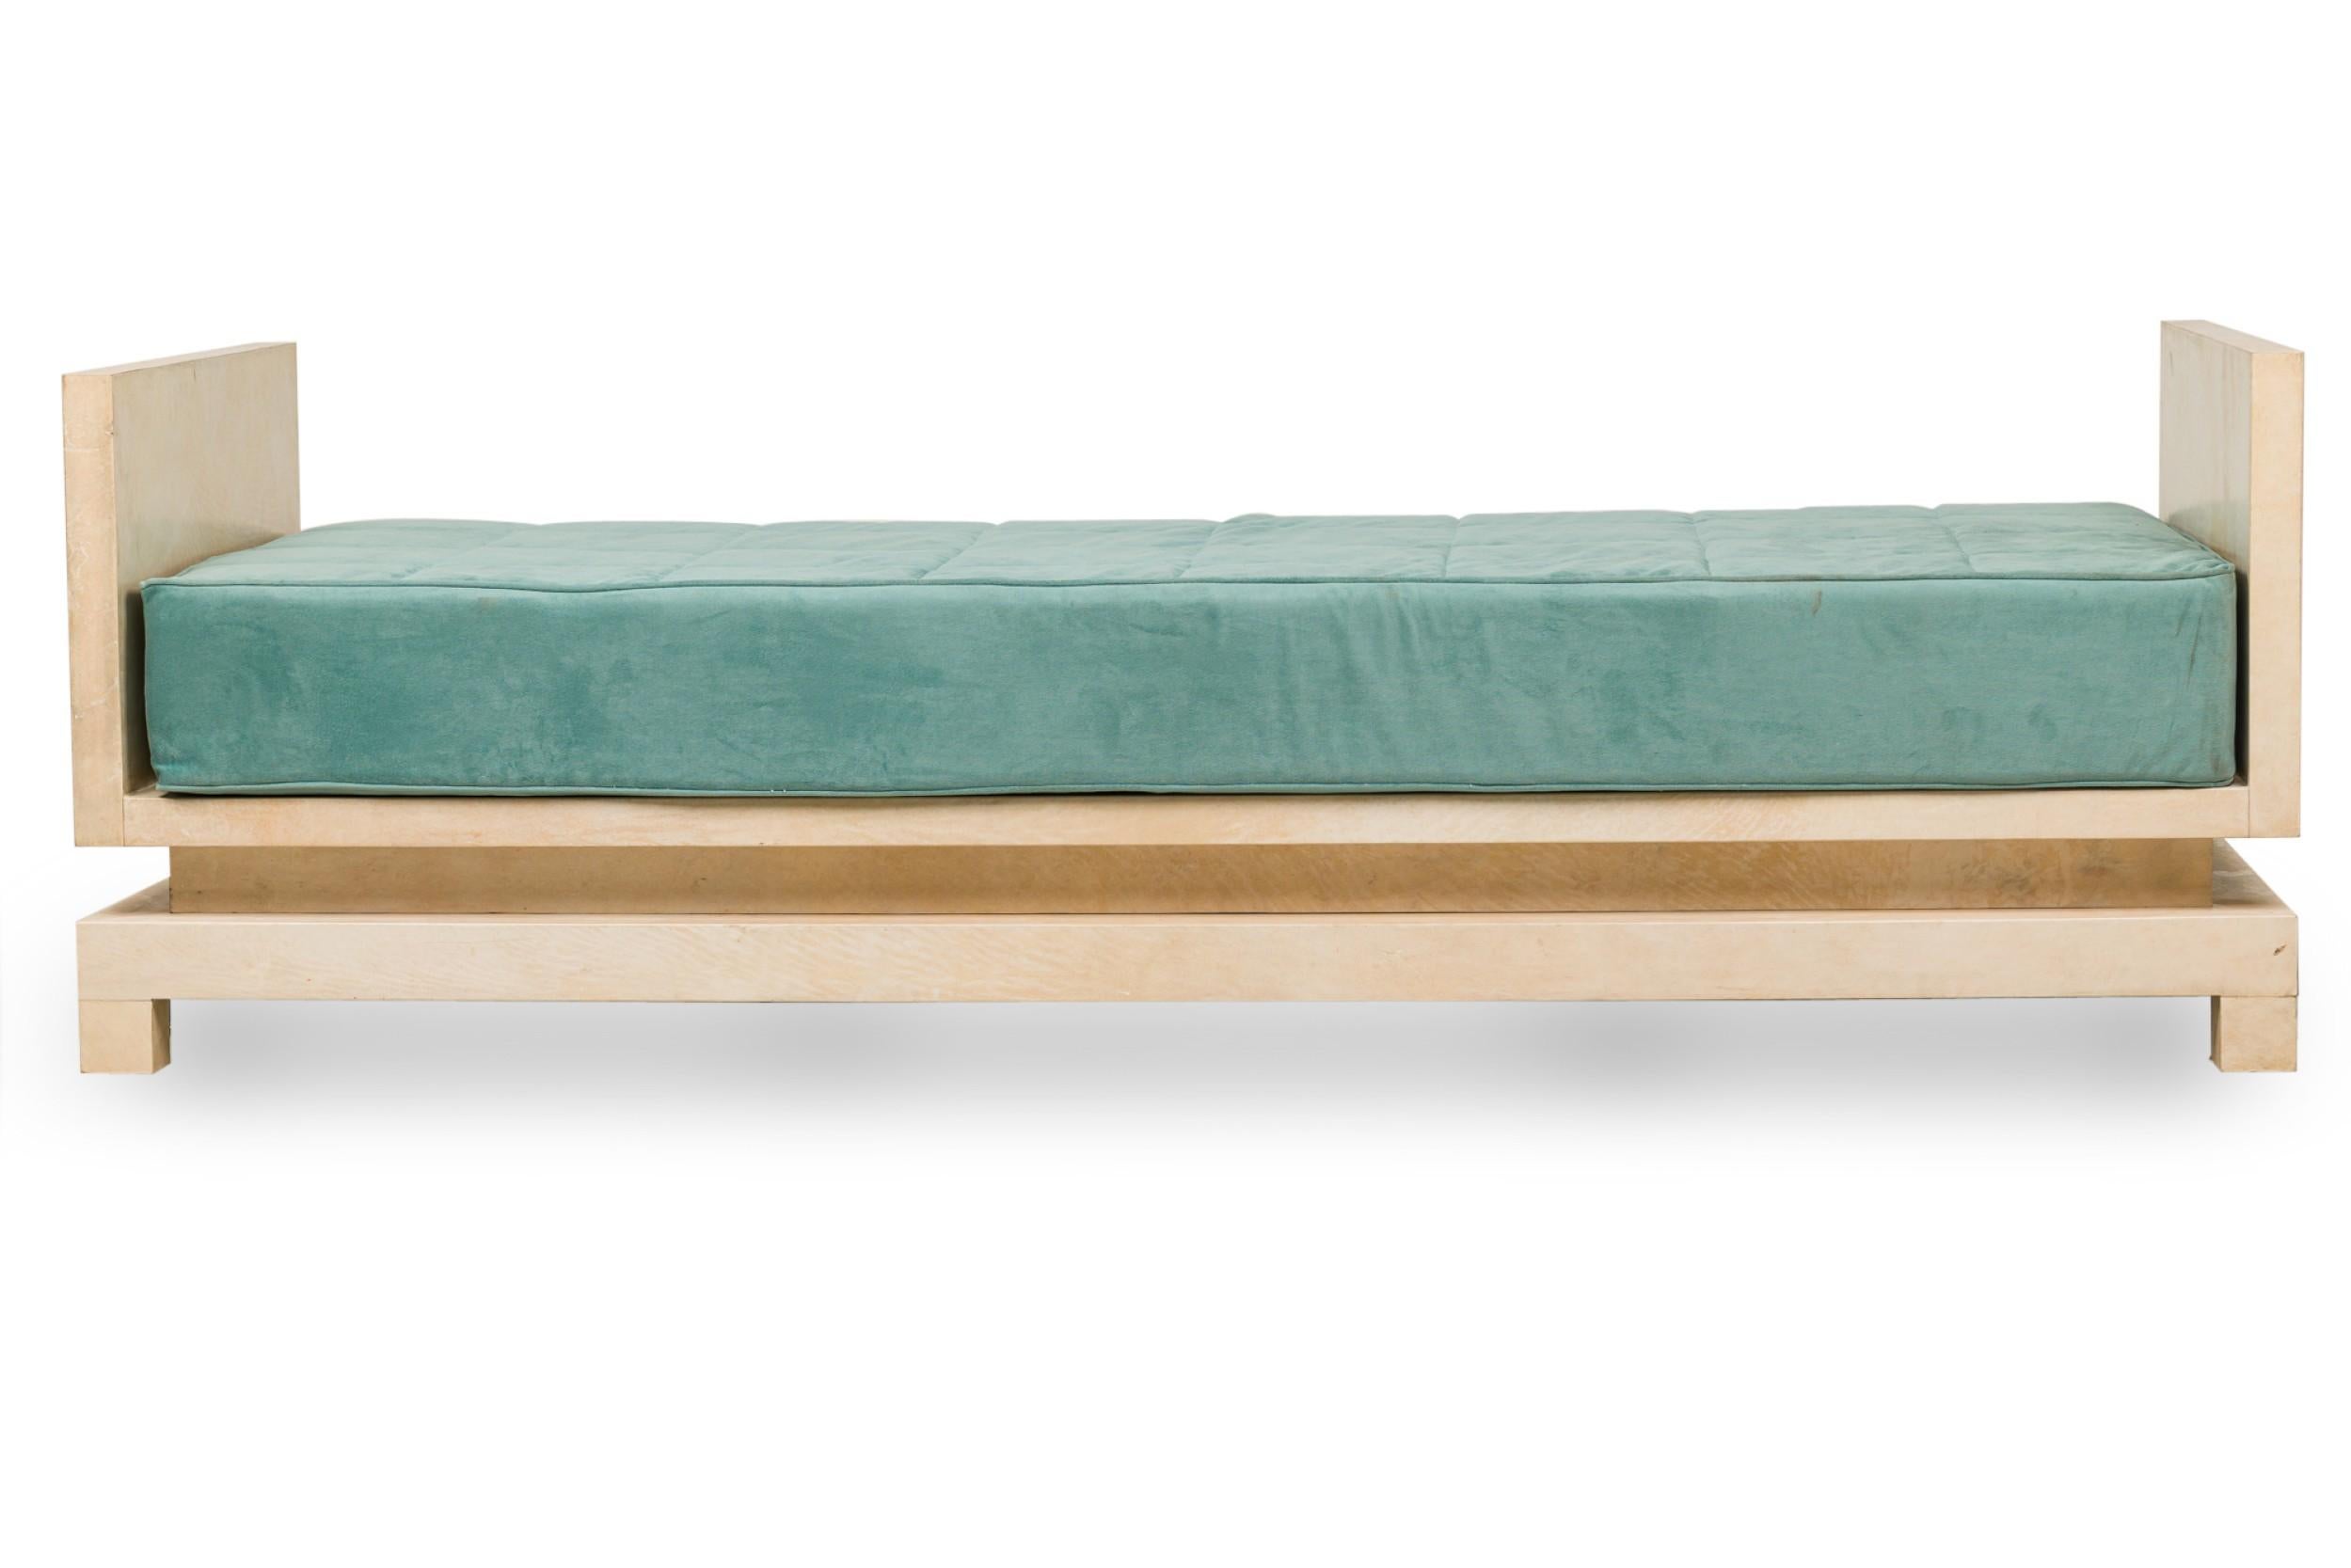 20th Century Mid-Century American Parchment and Teal Upholstered Daybed Manner of Samuel Marx For Sale